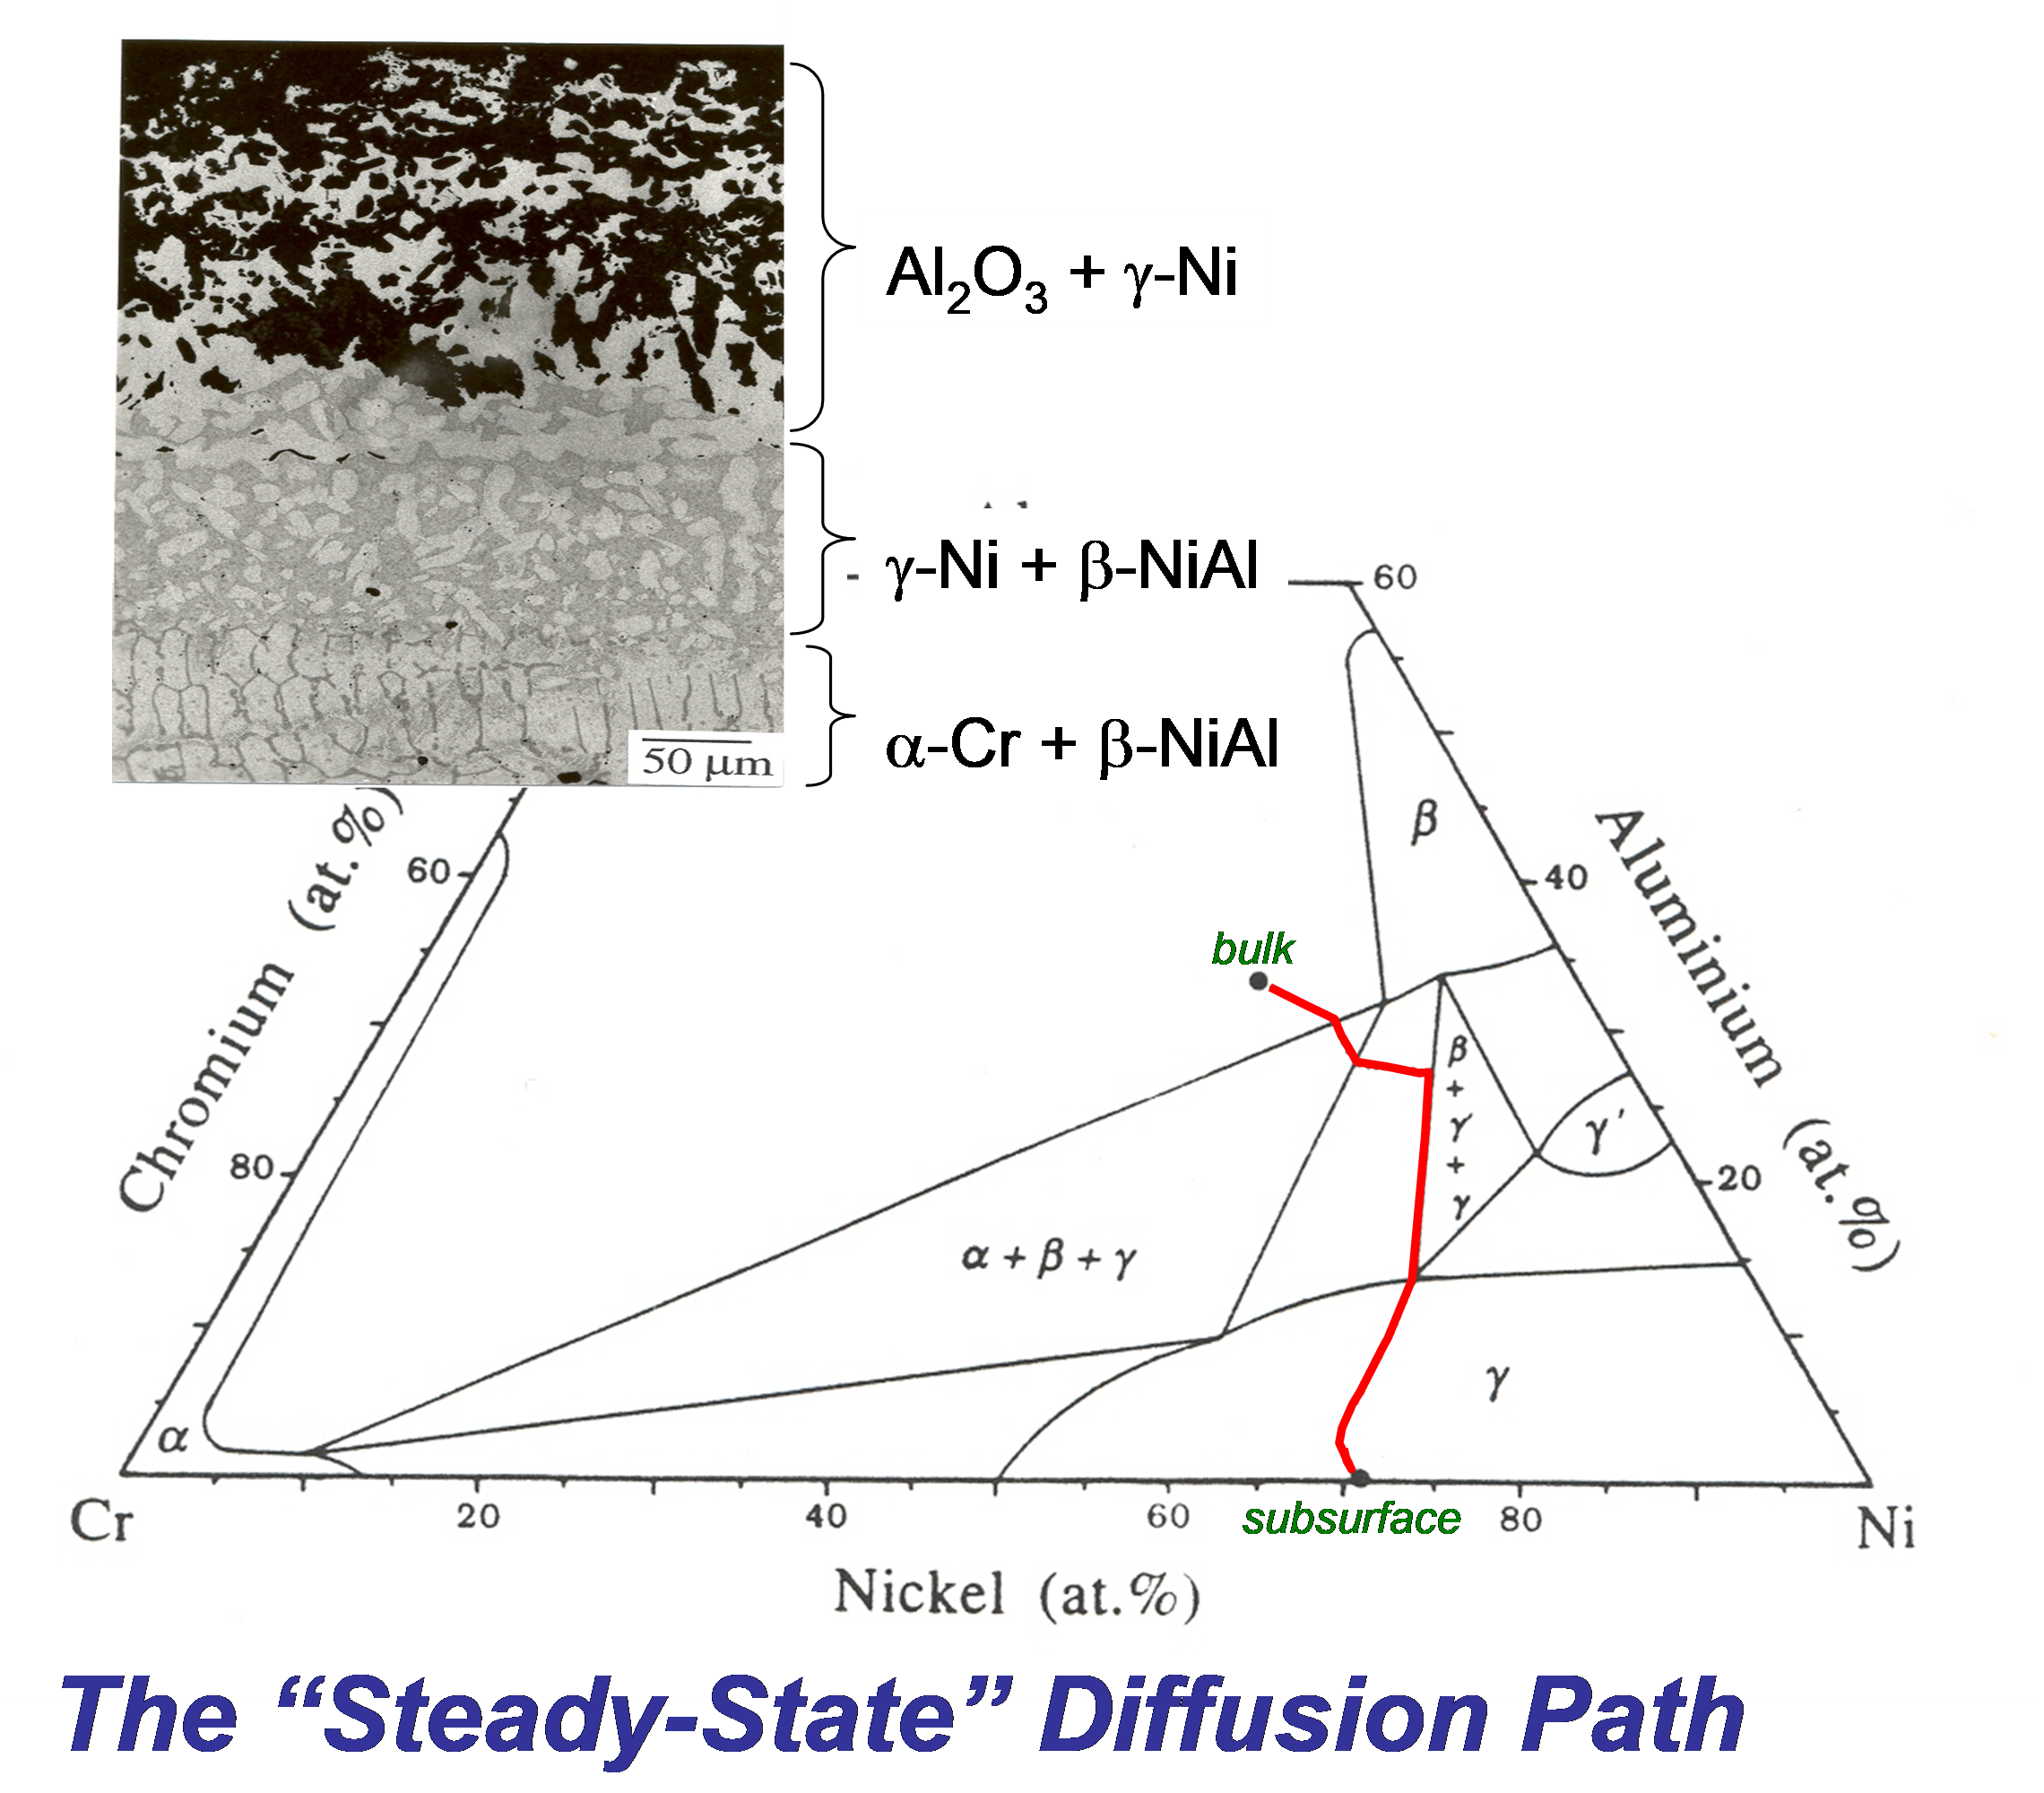 Evaluating metallurgical changes and their kinetics under high temperature diffusion mechanisms.